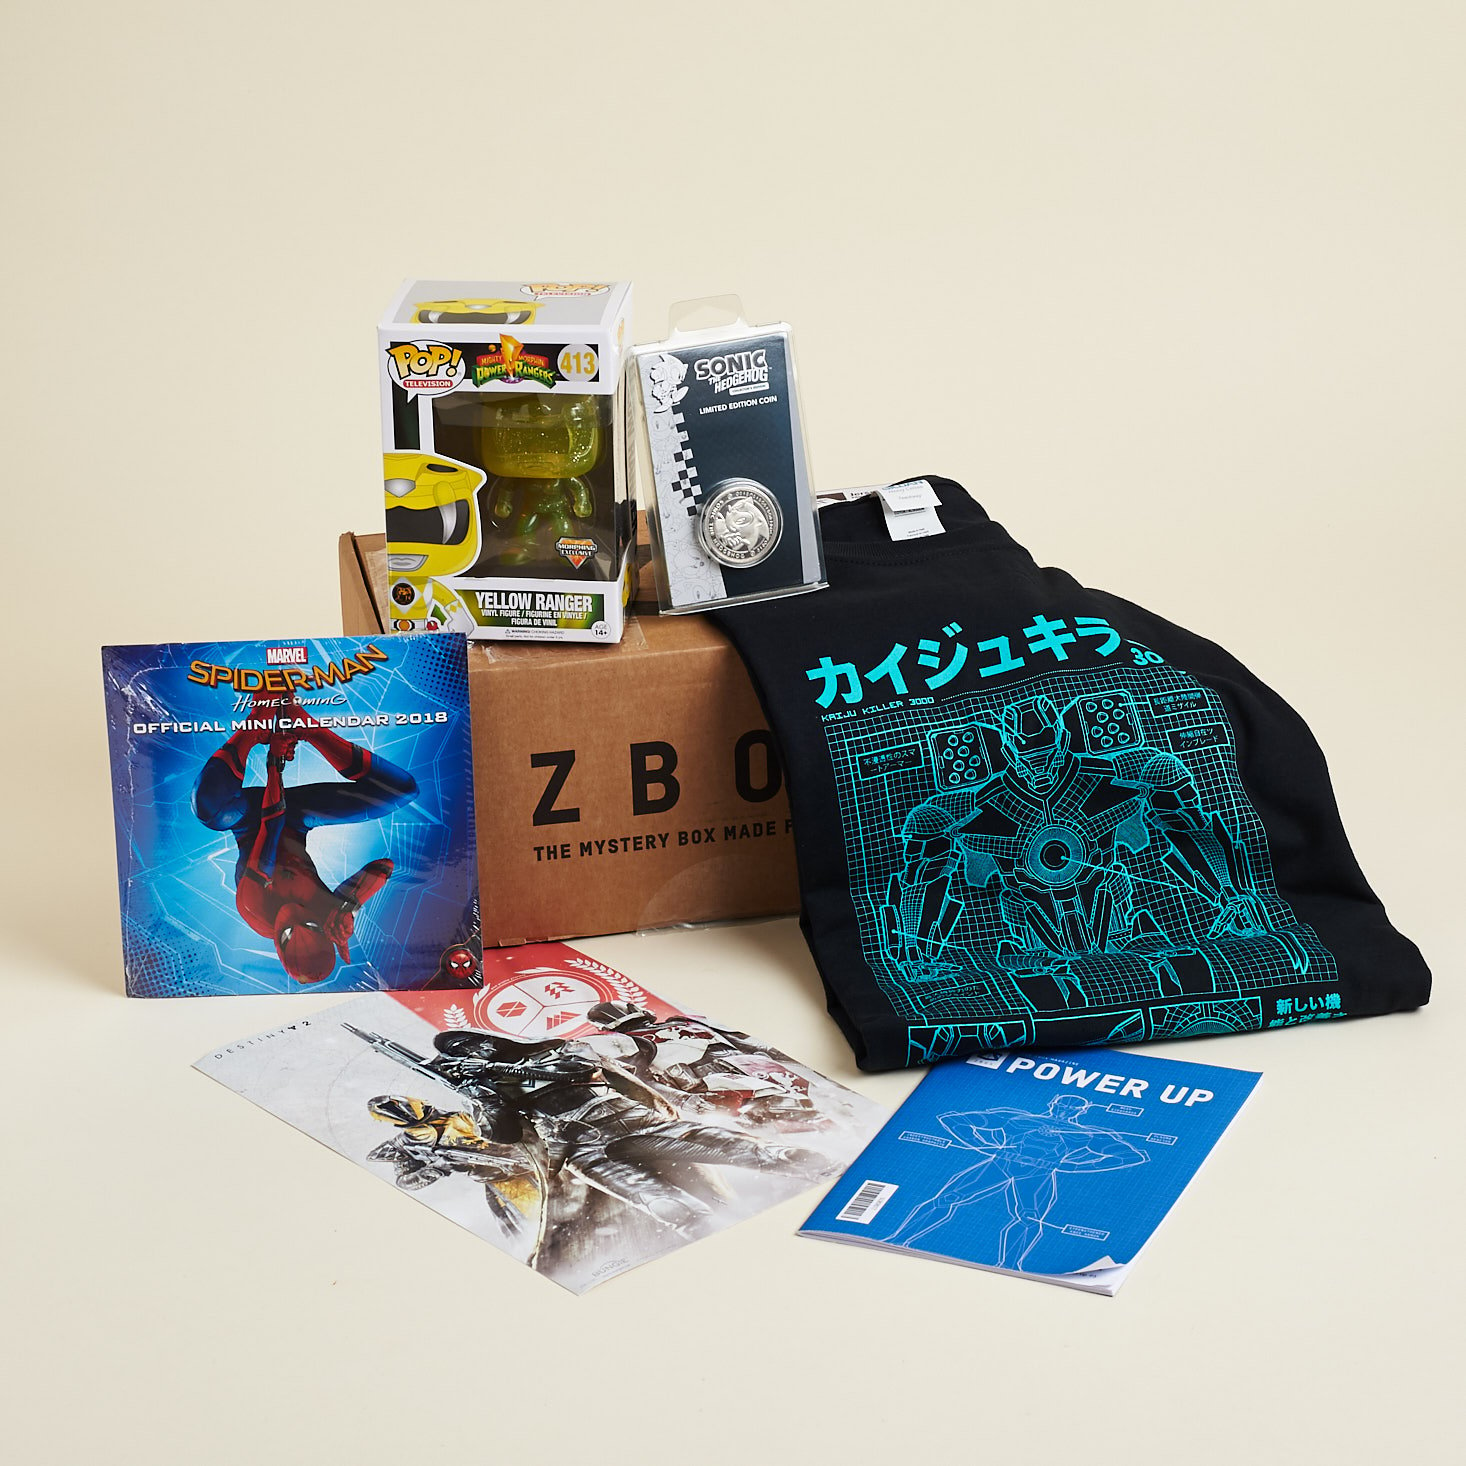 ZBox Subscription Box Review – January 2018